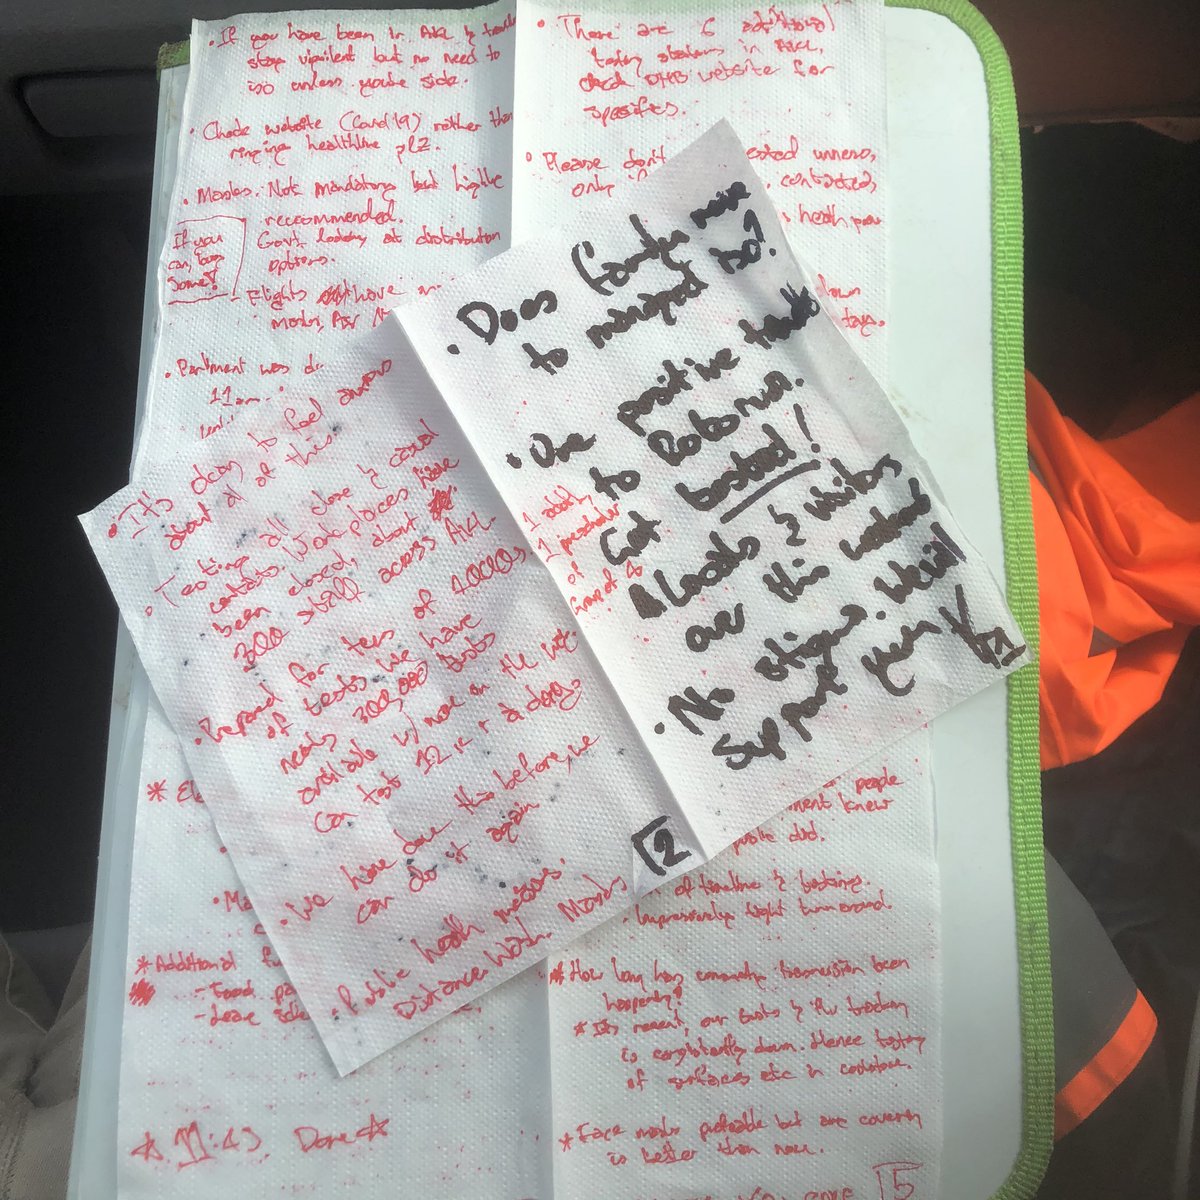 So this is what an hour worth of writing presser summary notes in the truck looks like. Don’t worry - Pie was driving. I’m just sassy company and lifting assist. Next stop: condensing and writing up.